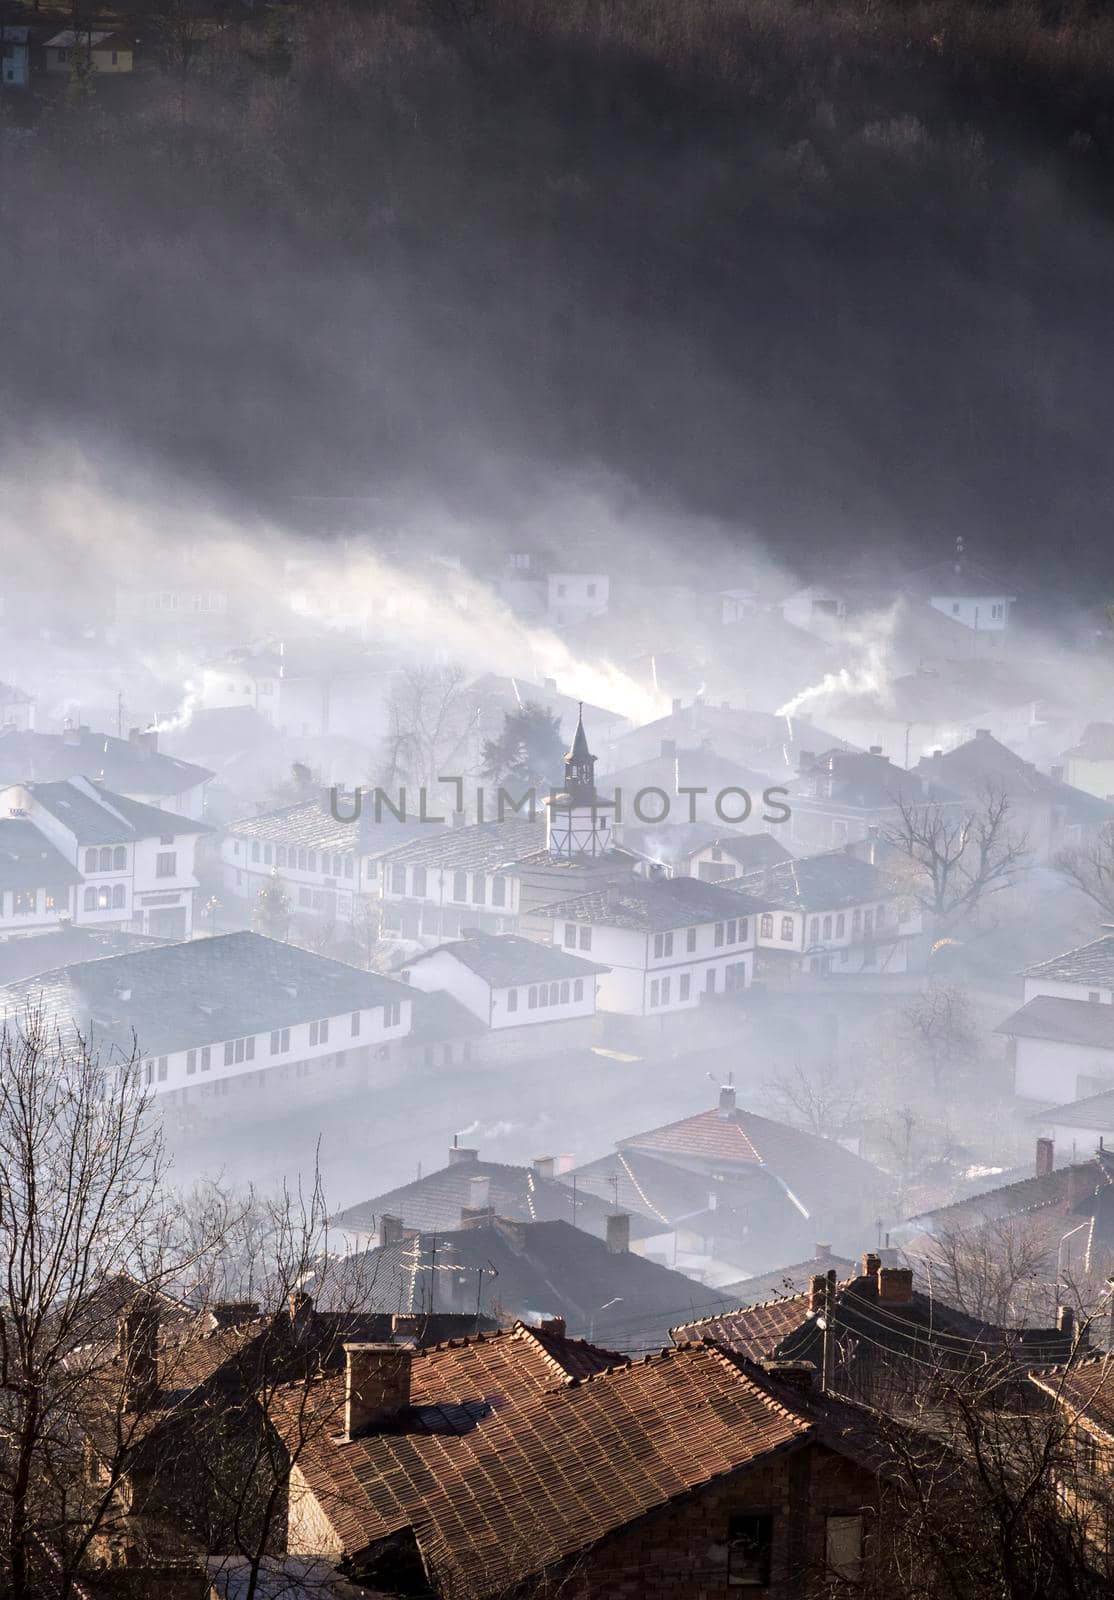 Mountain town in clouds of fog and smoking chimneys early morning by EdVal